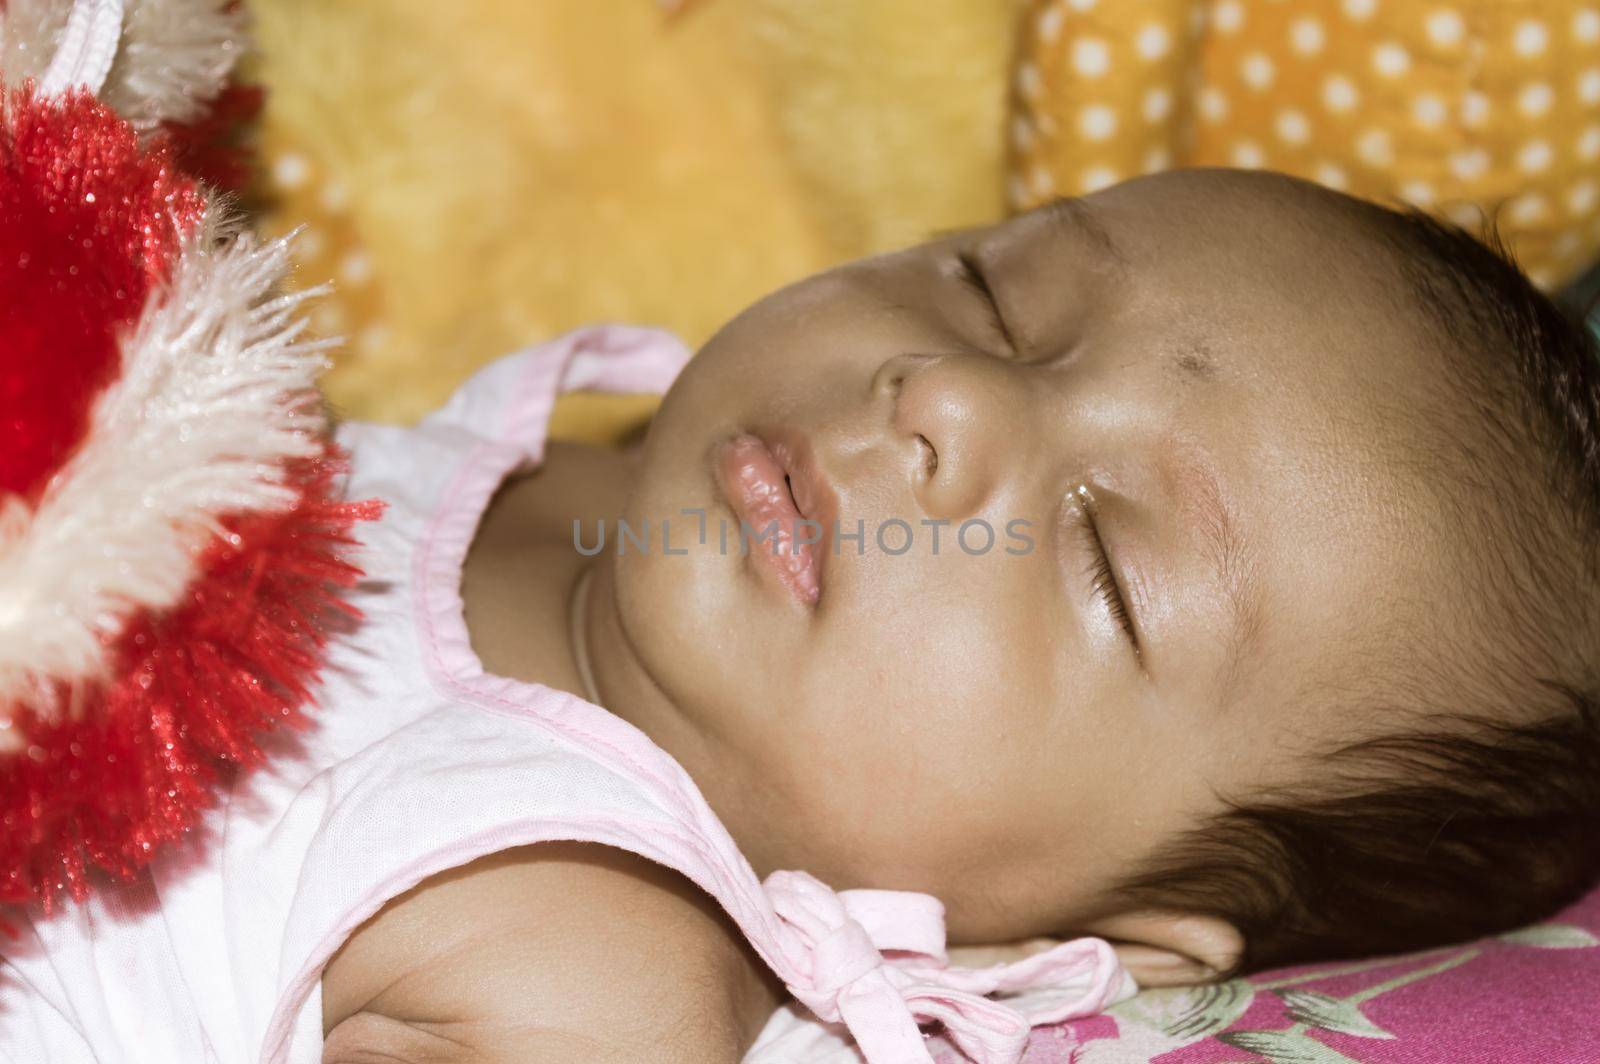 Close up face of cute sleeping newborn baby boy in drowsy eyes sleepy mood lying on bed. Portrait One Sweet little infant toddler. Indian ethnicity. Front view. Child care peace tranquil background.